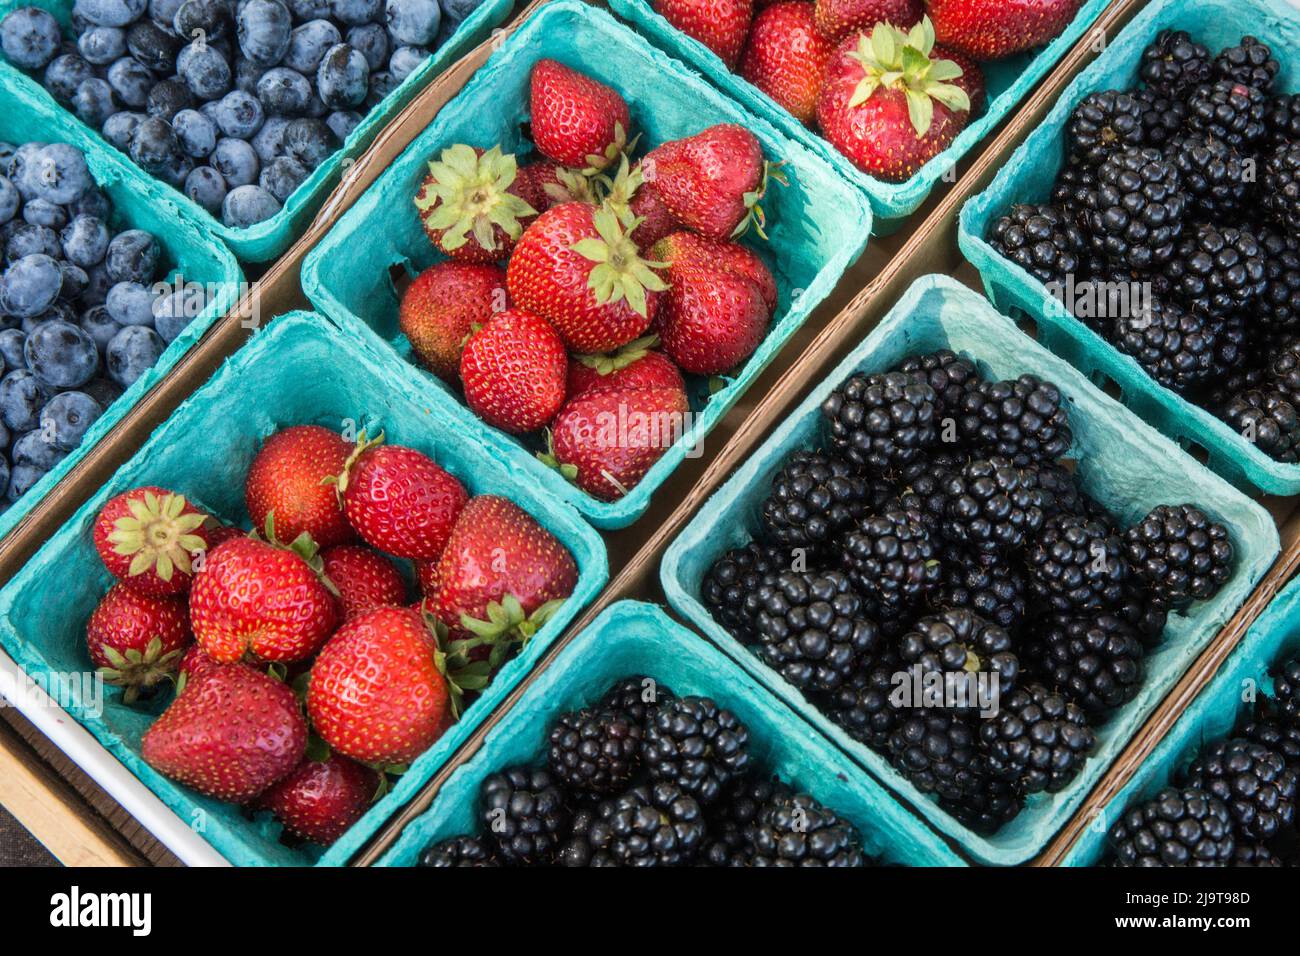 Issaquah, Washington State, USA. Pints of freshly harvested strawberries, blueberries and blackberries for sale at a Farmer's Market. Stock Photo